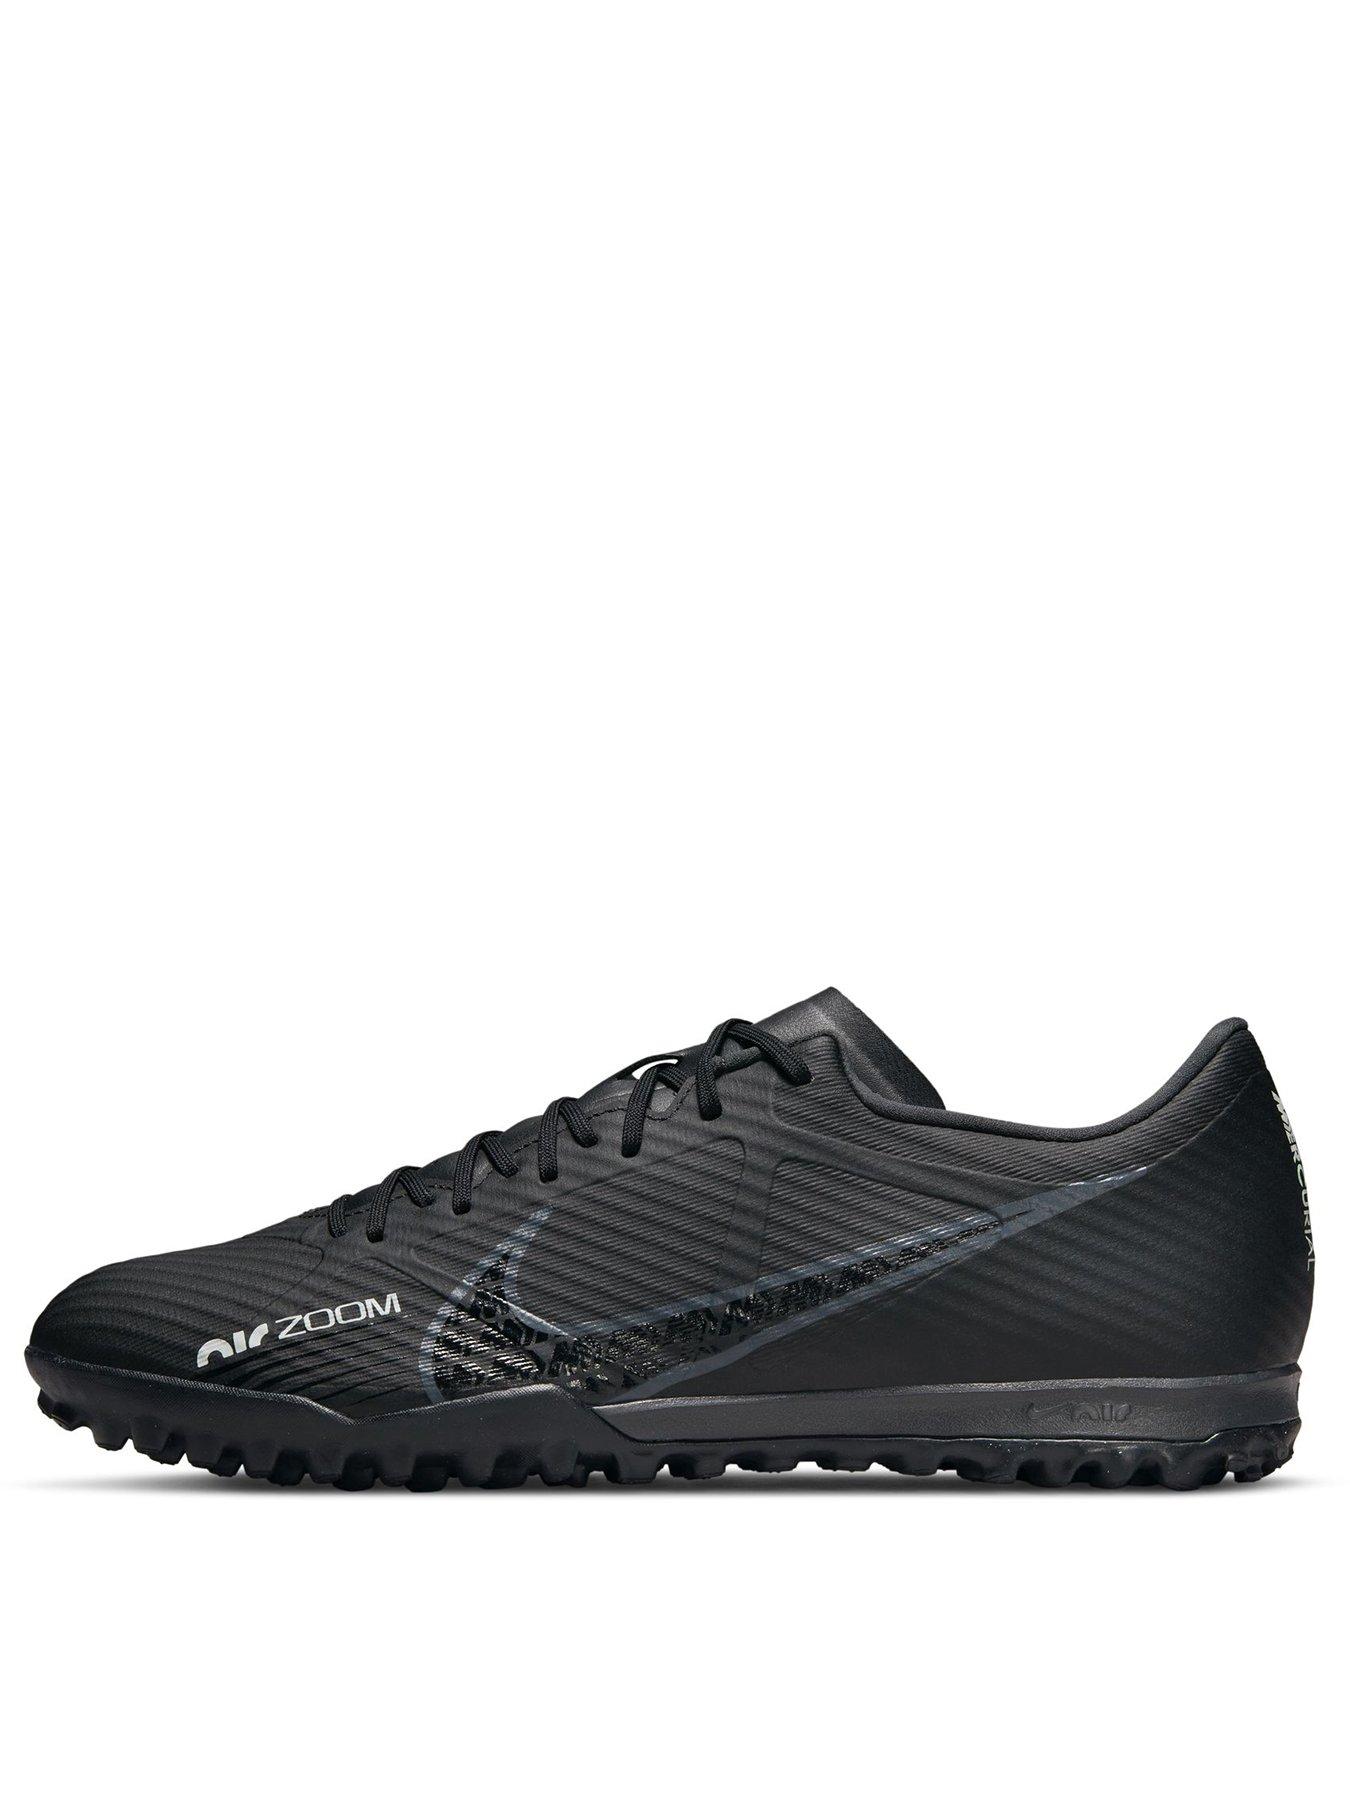 Astro Turf | Football boots | Mens | Sports & www.very.co.uk